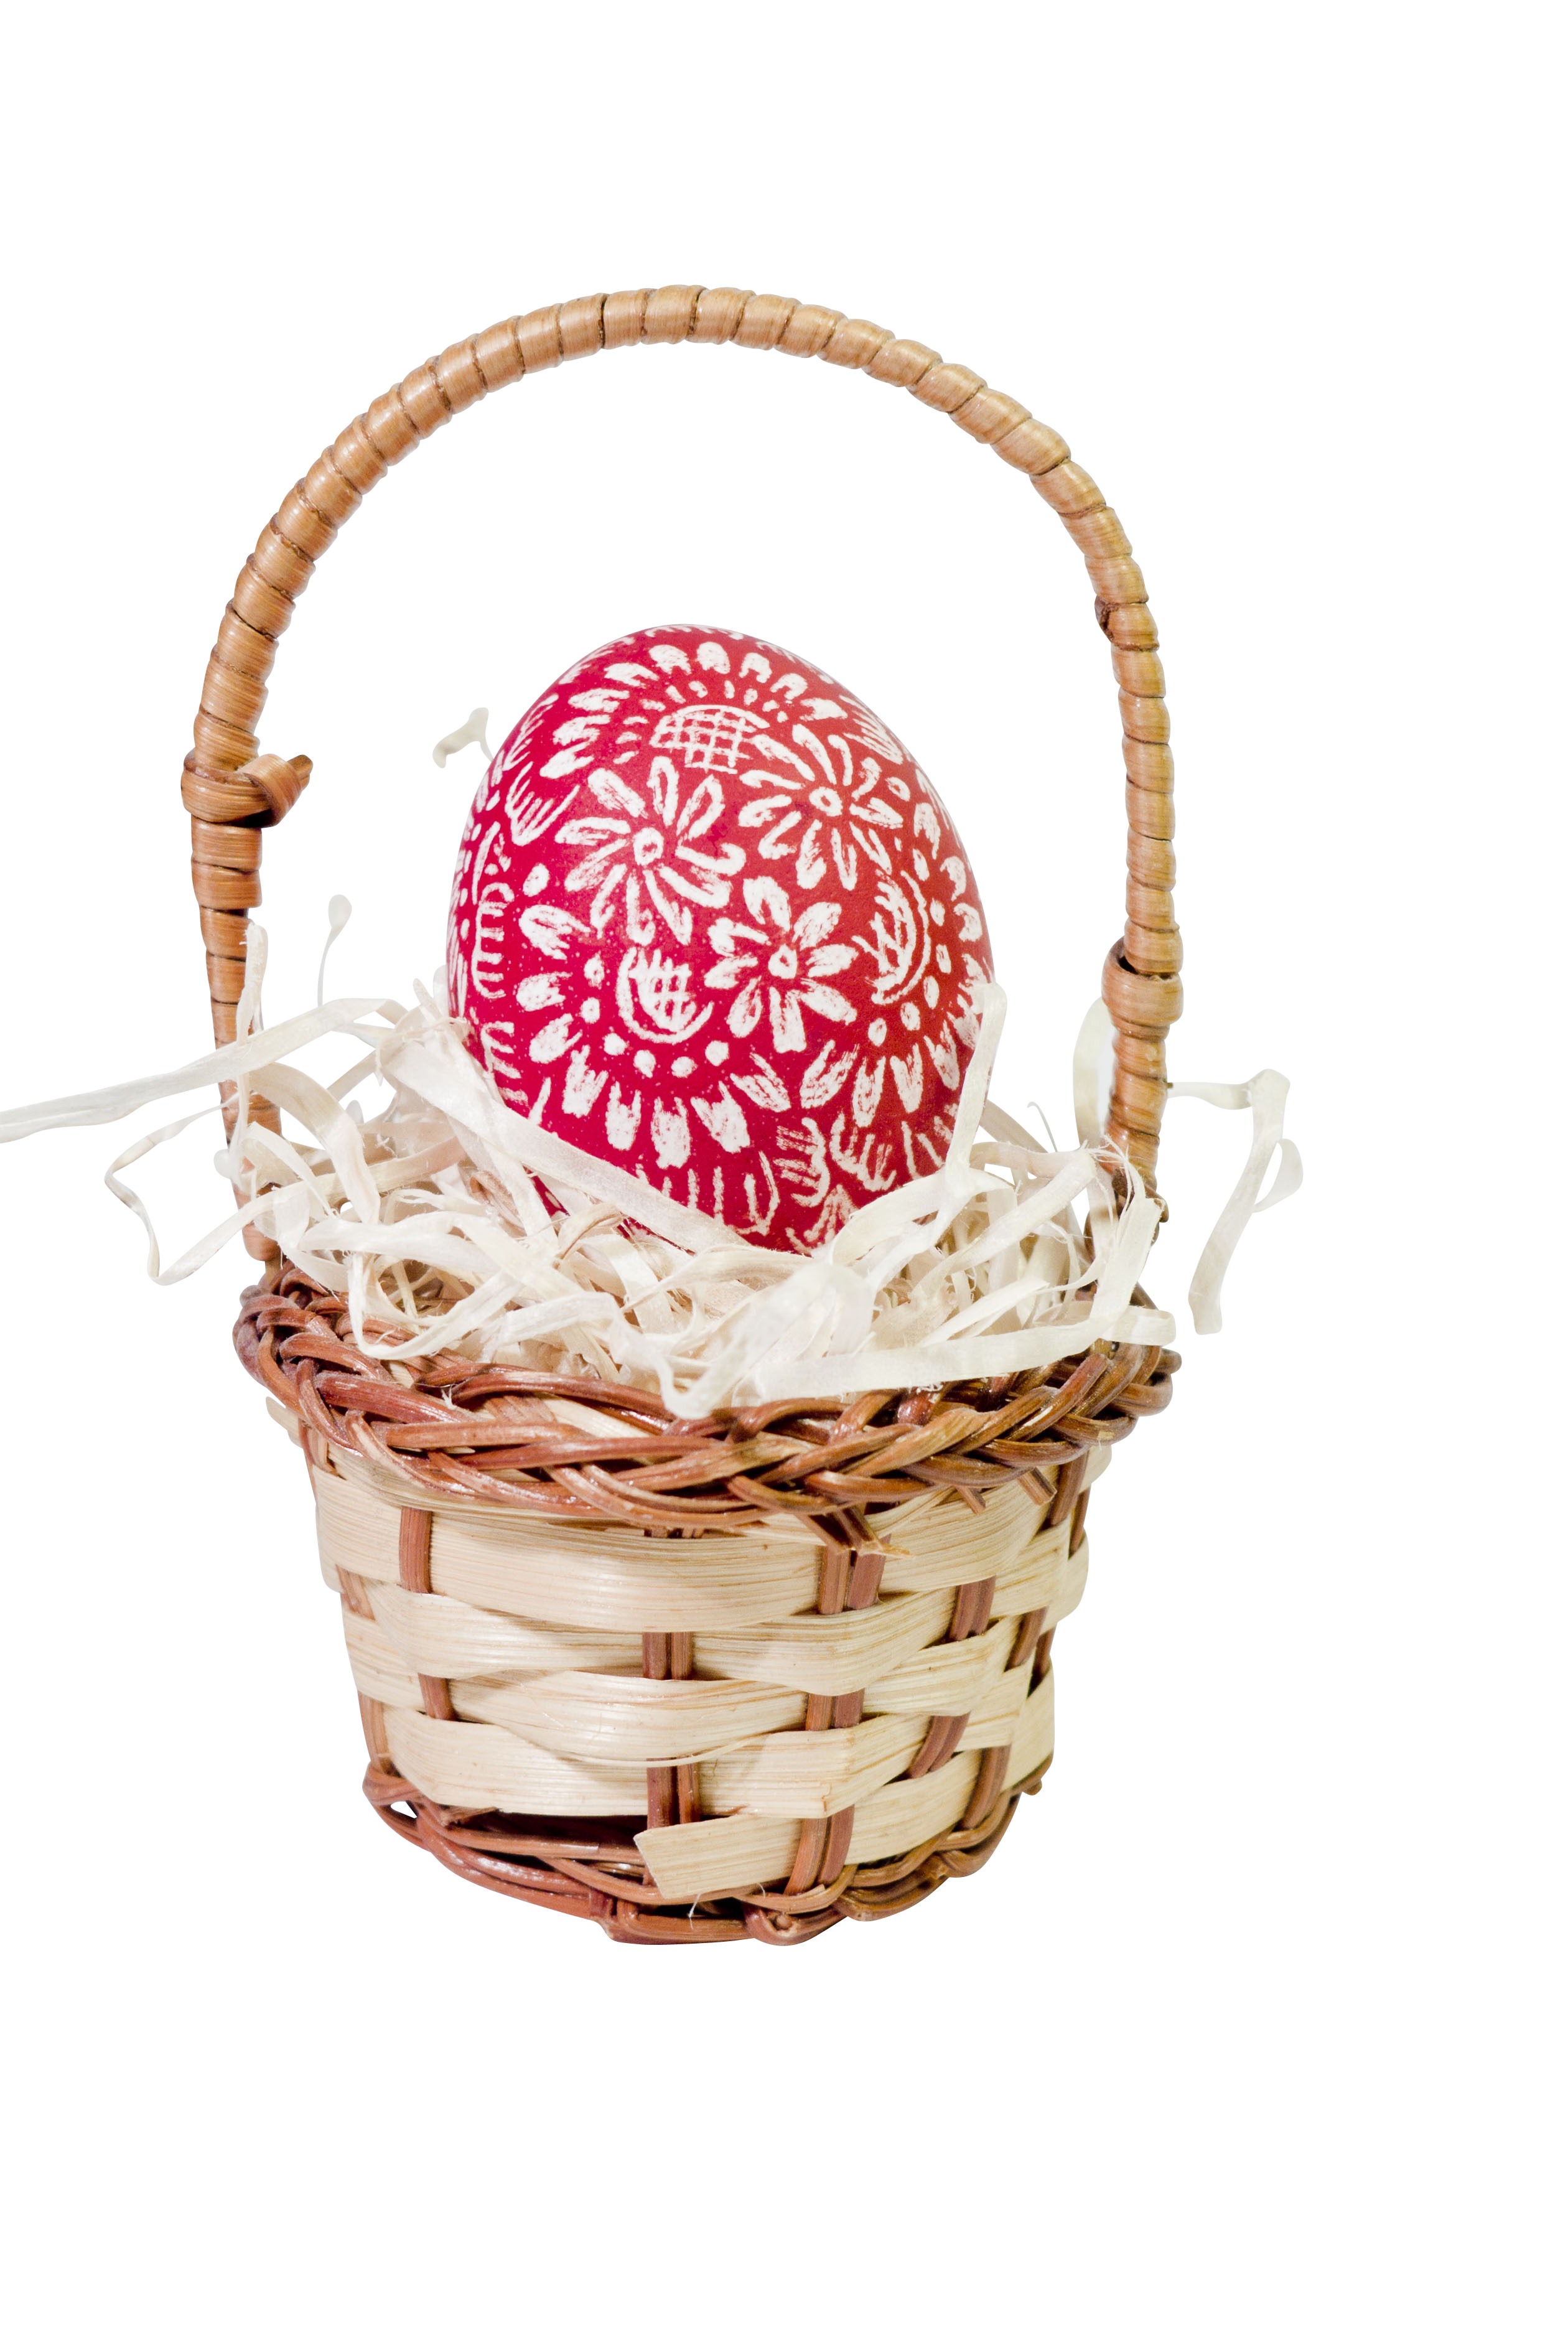 A Red Egg In A Basket